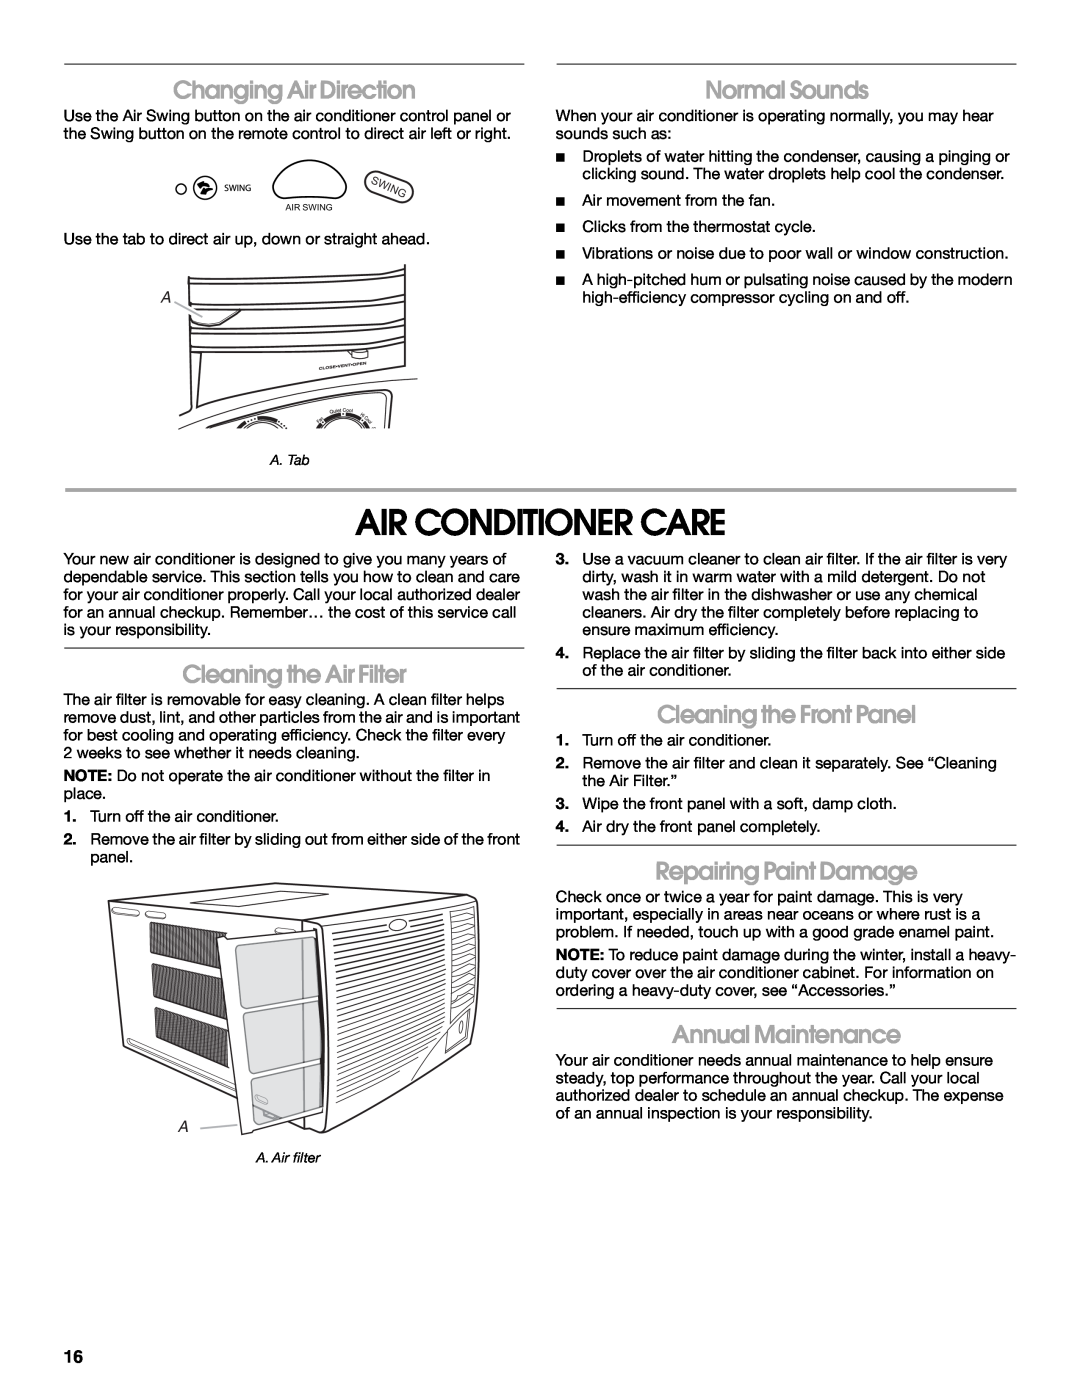 Whirlpool ACE184PT0 manual Air Conditioner Care, Changing Air Direction, Normal Sounds, Cleaning the Air Filter 